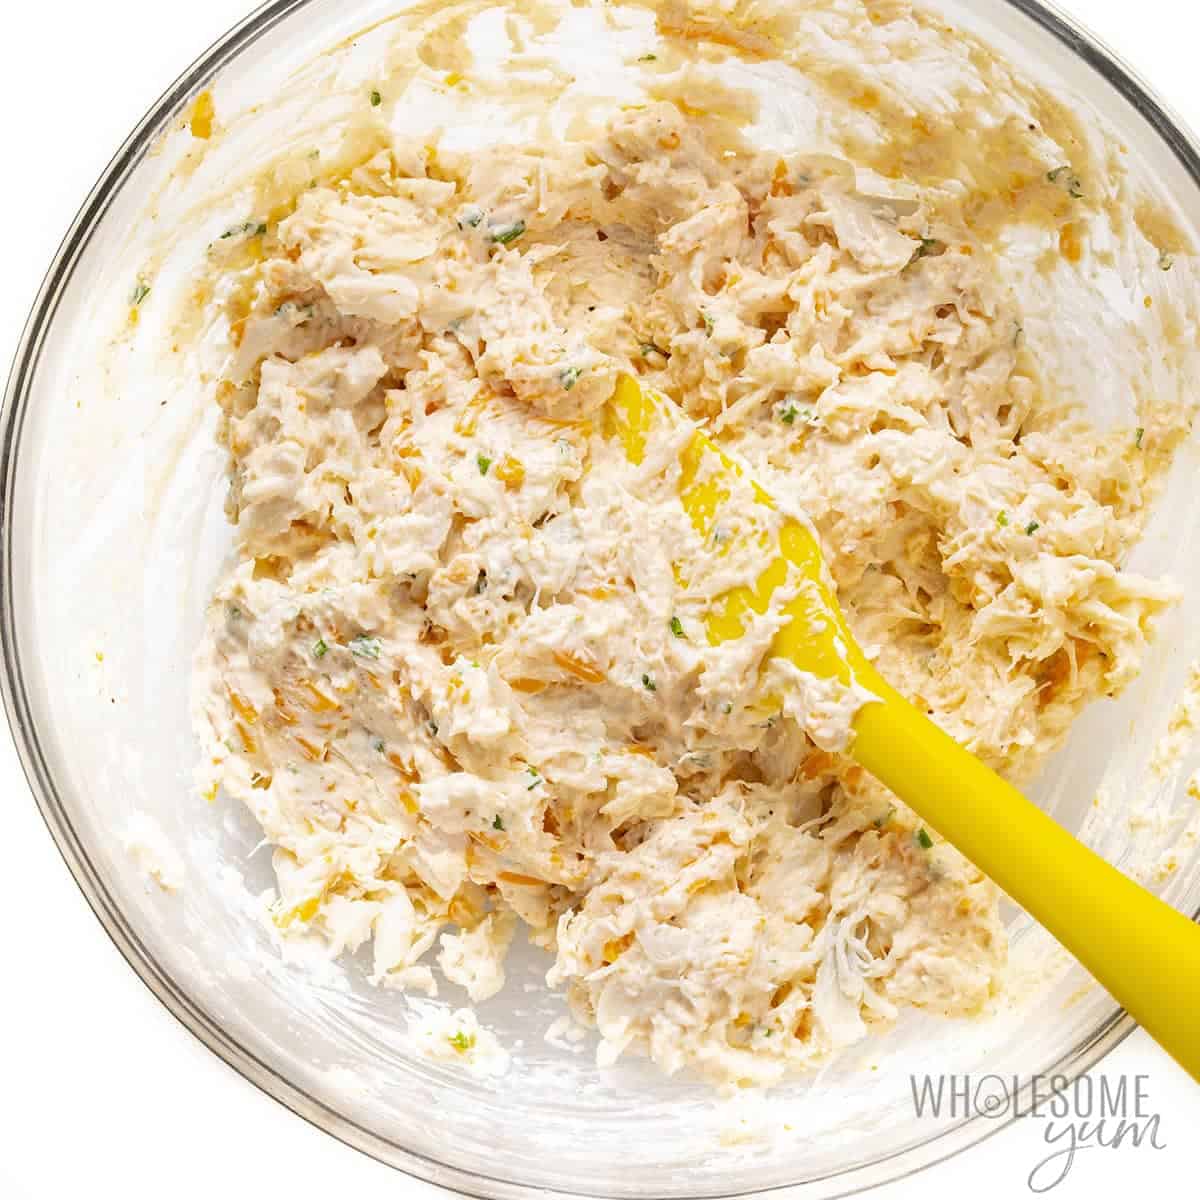 Crab dip mixture with lumb crab meat added.